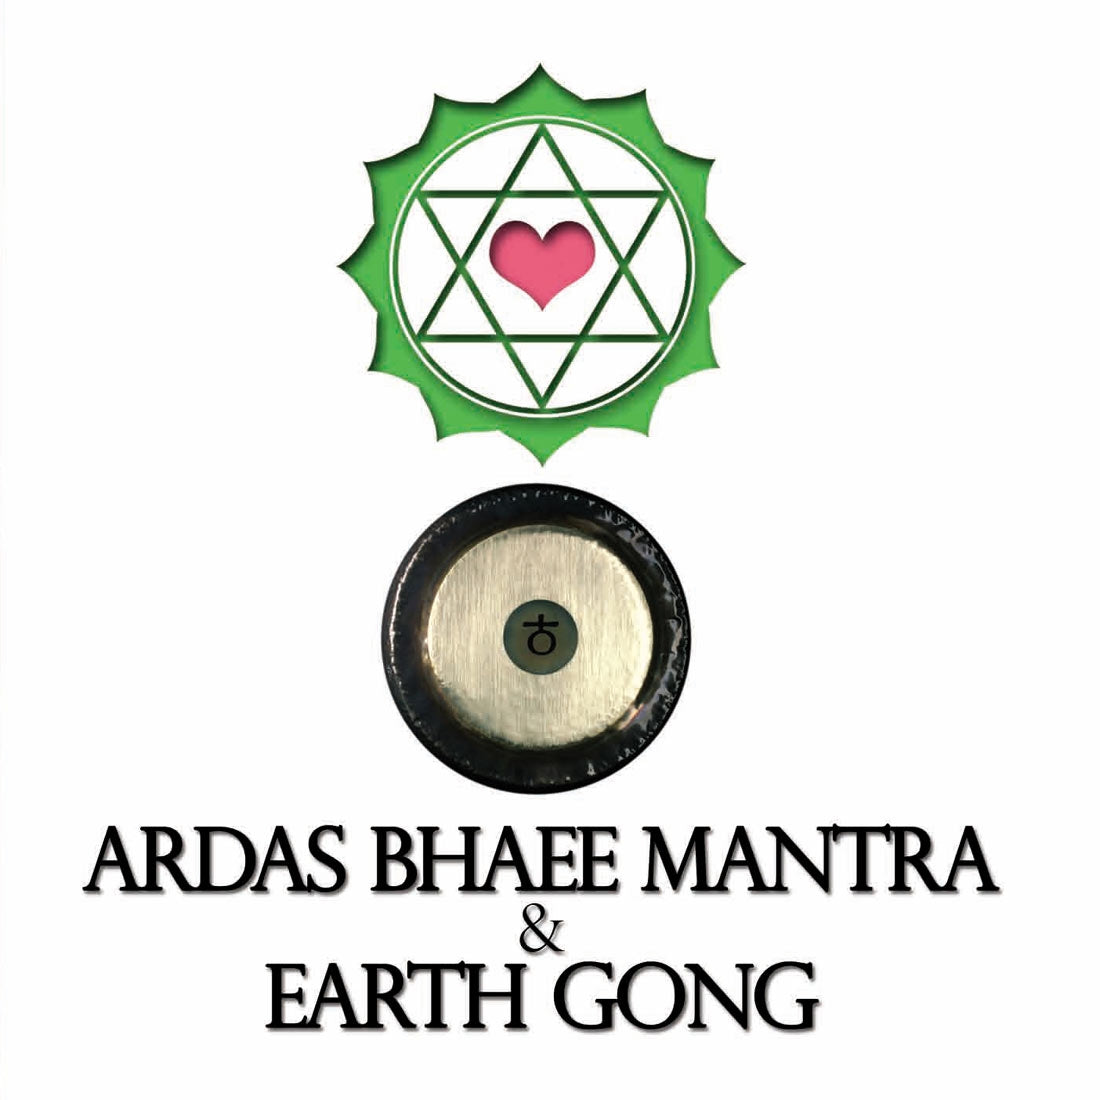 Ardas Bhaee Mantra &amp; Earth Gong - Mark Swan complet